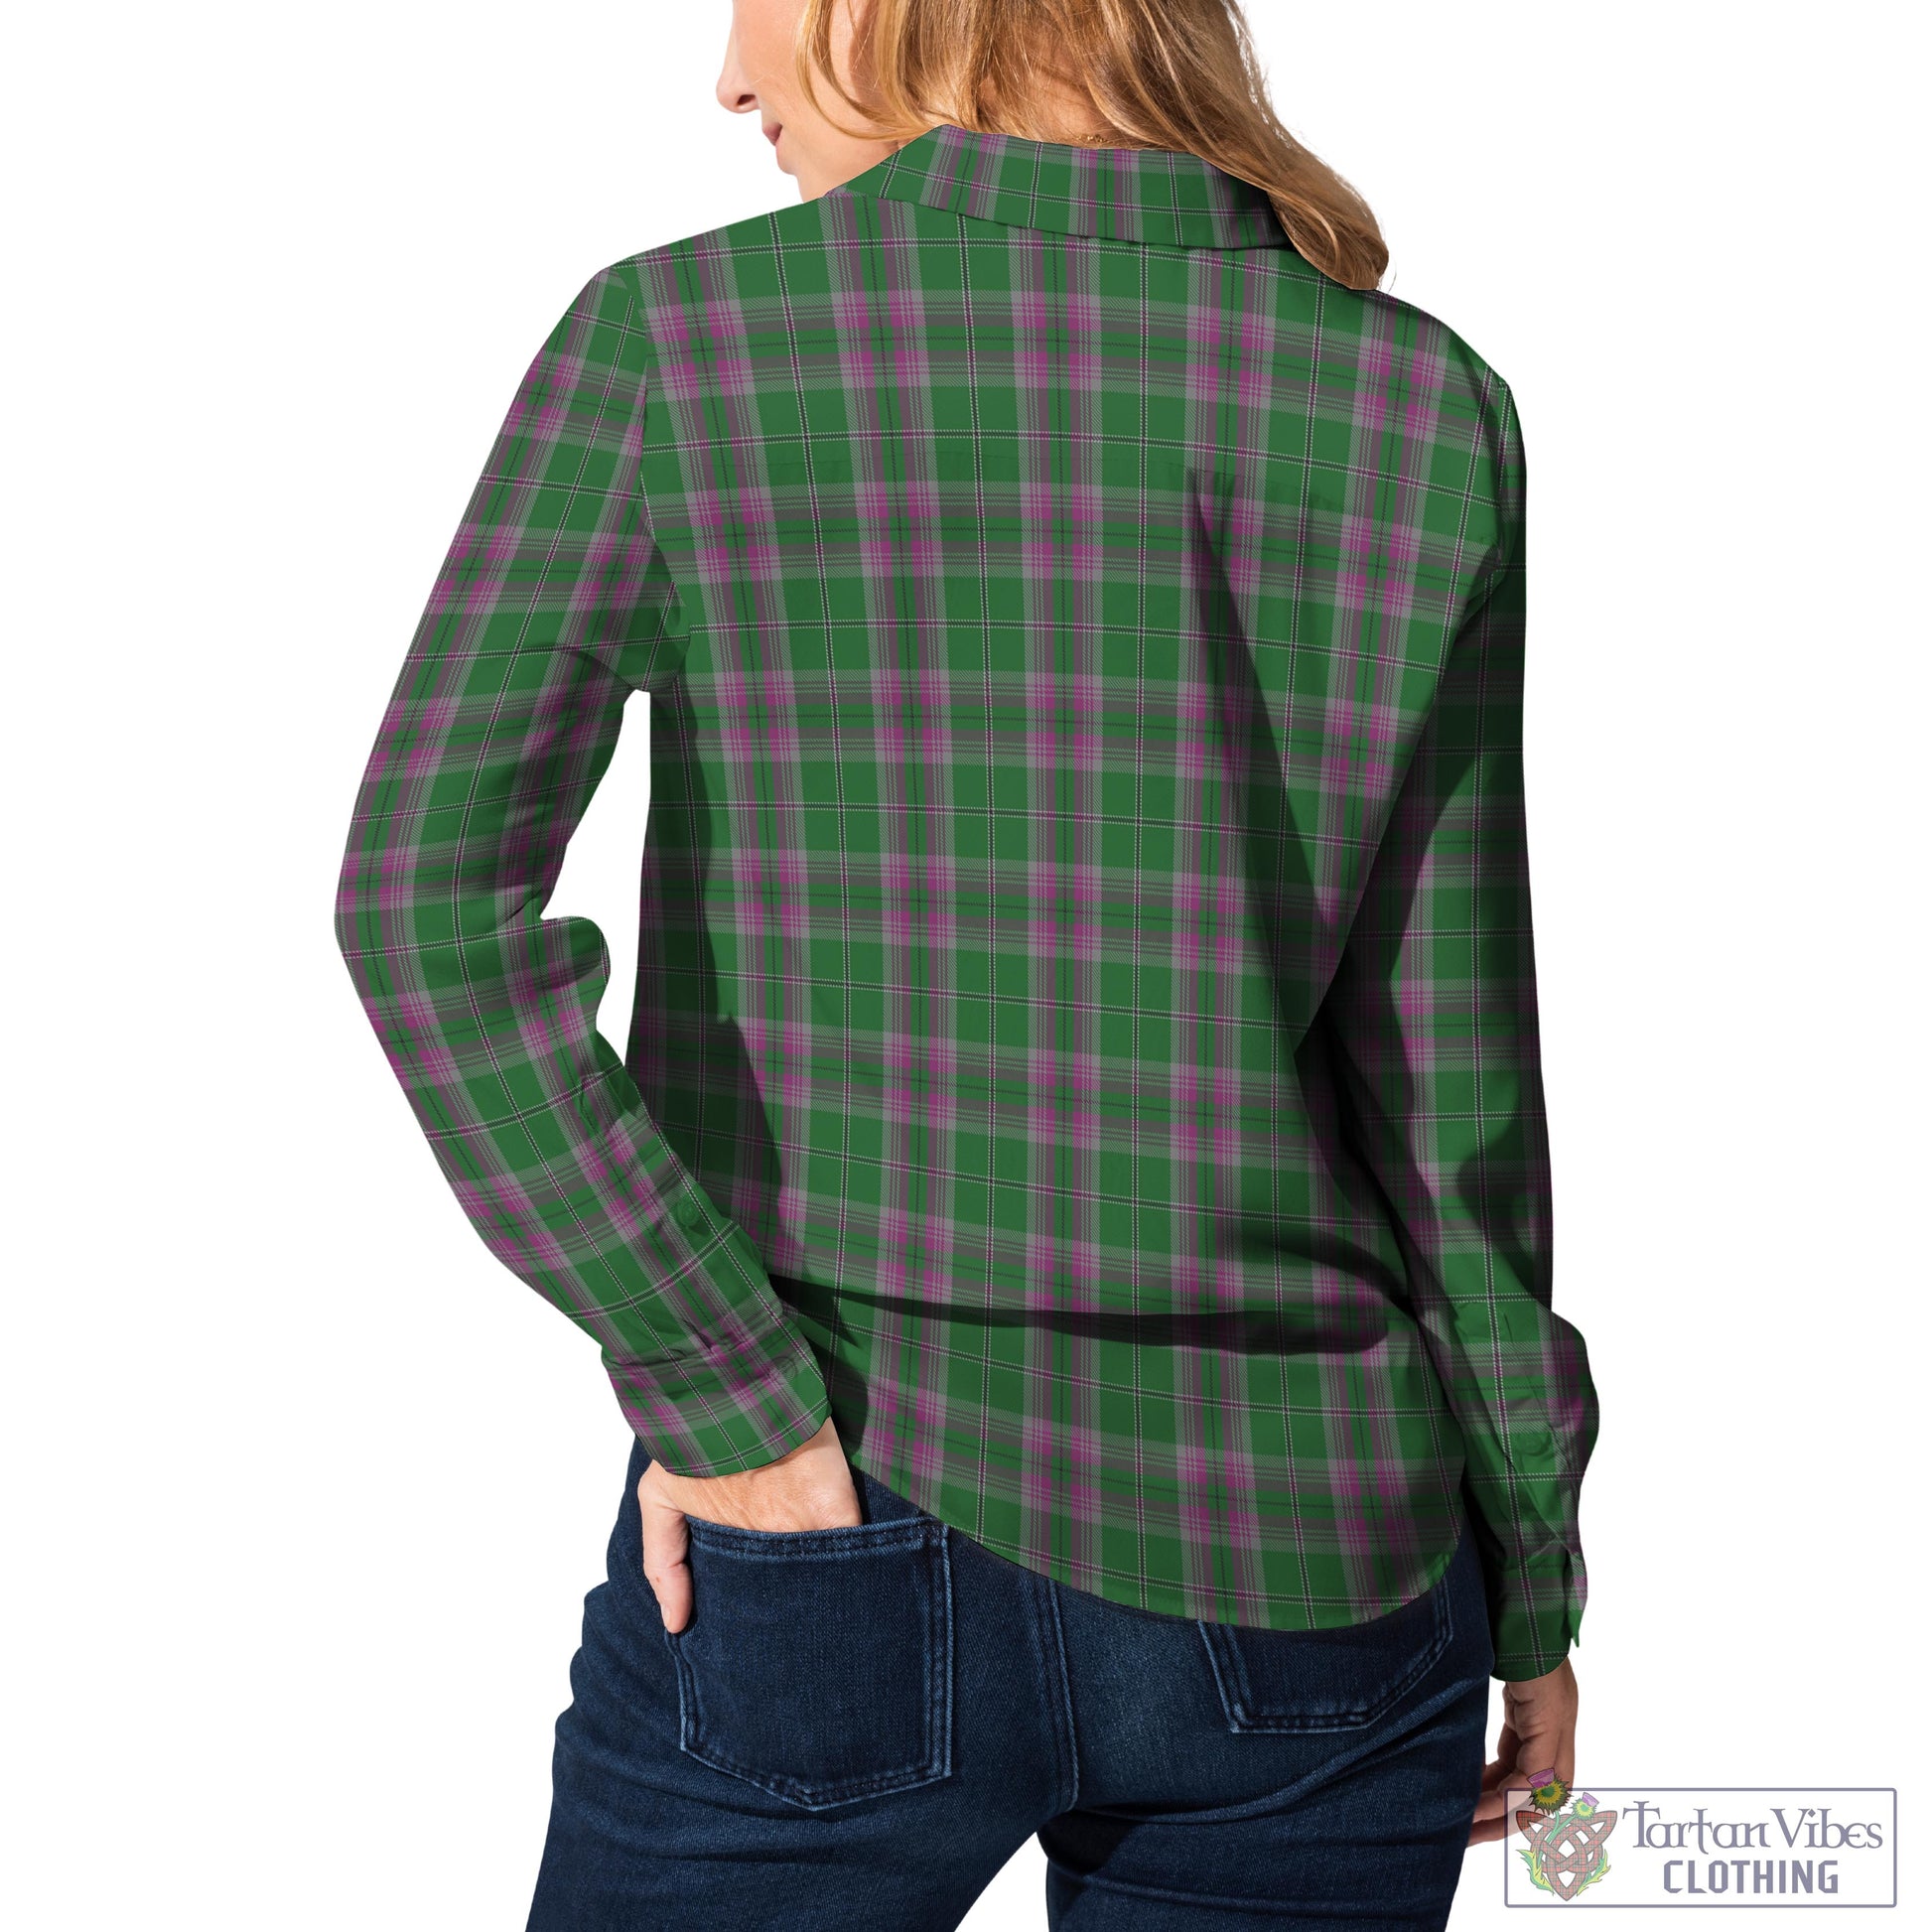 Tartan Vibes Clothing Gray Hunting Tartan Womens Casual Shirt with Family Crest